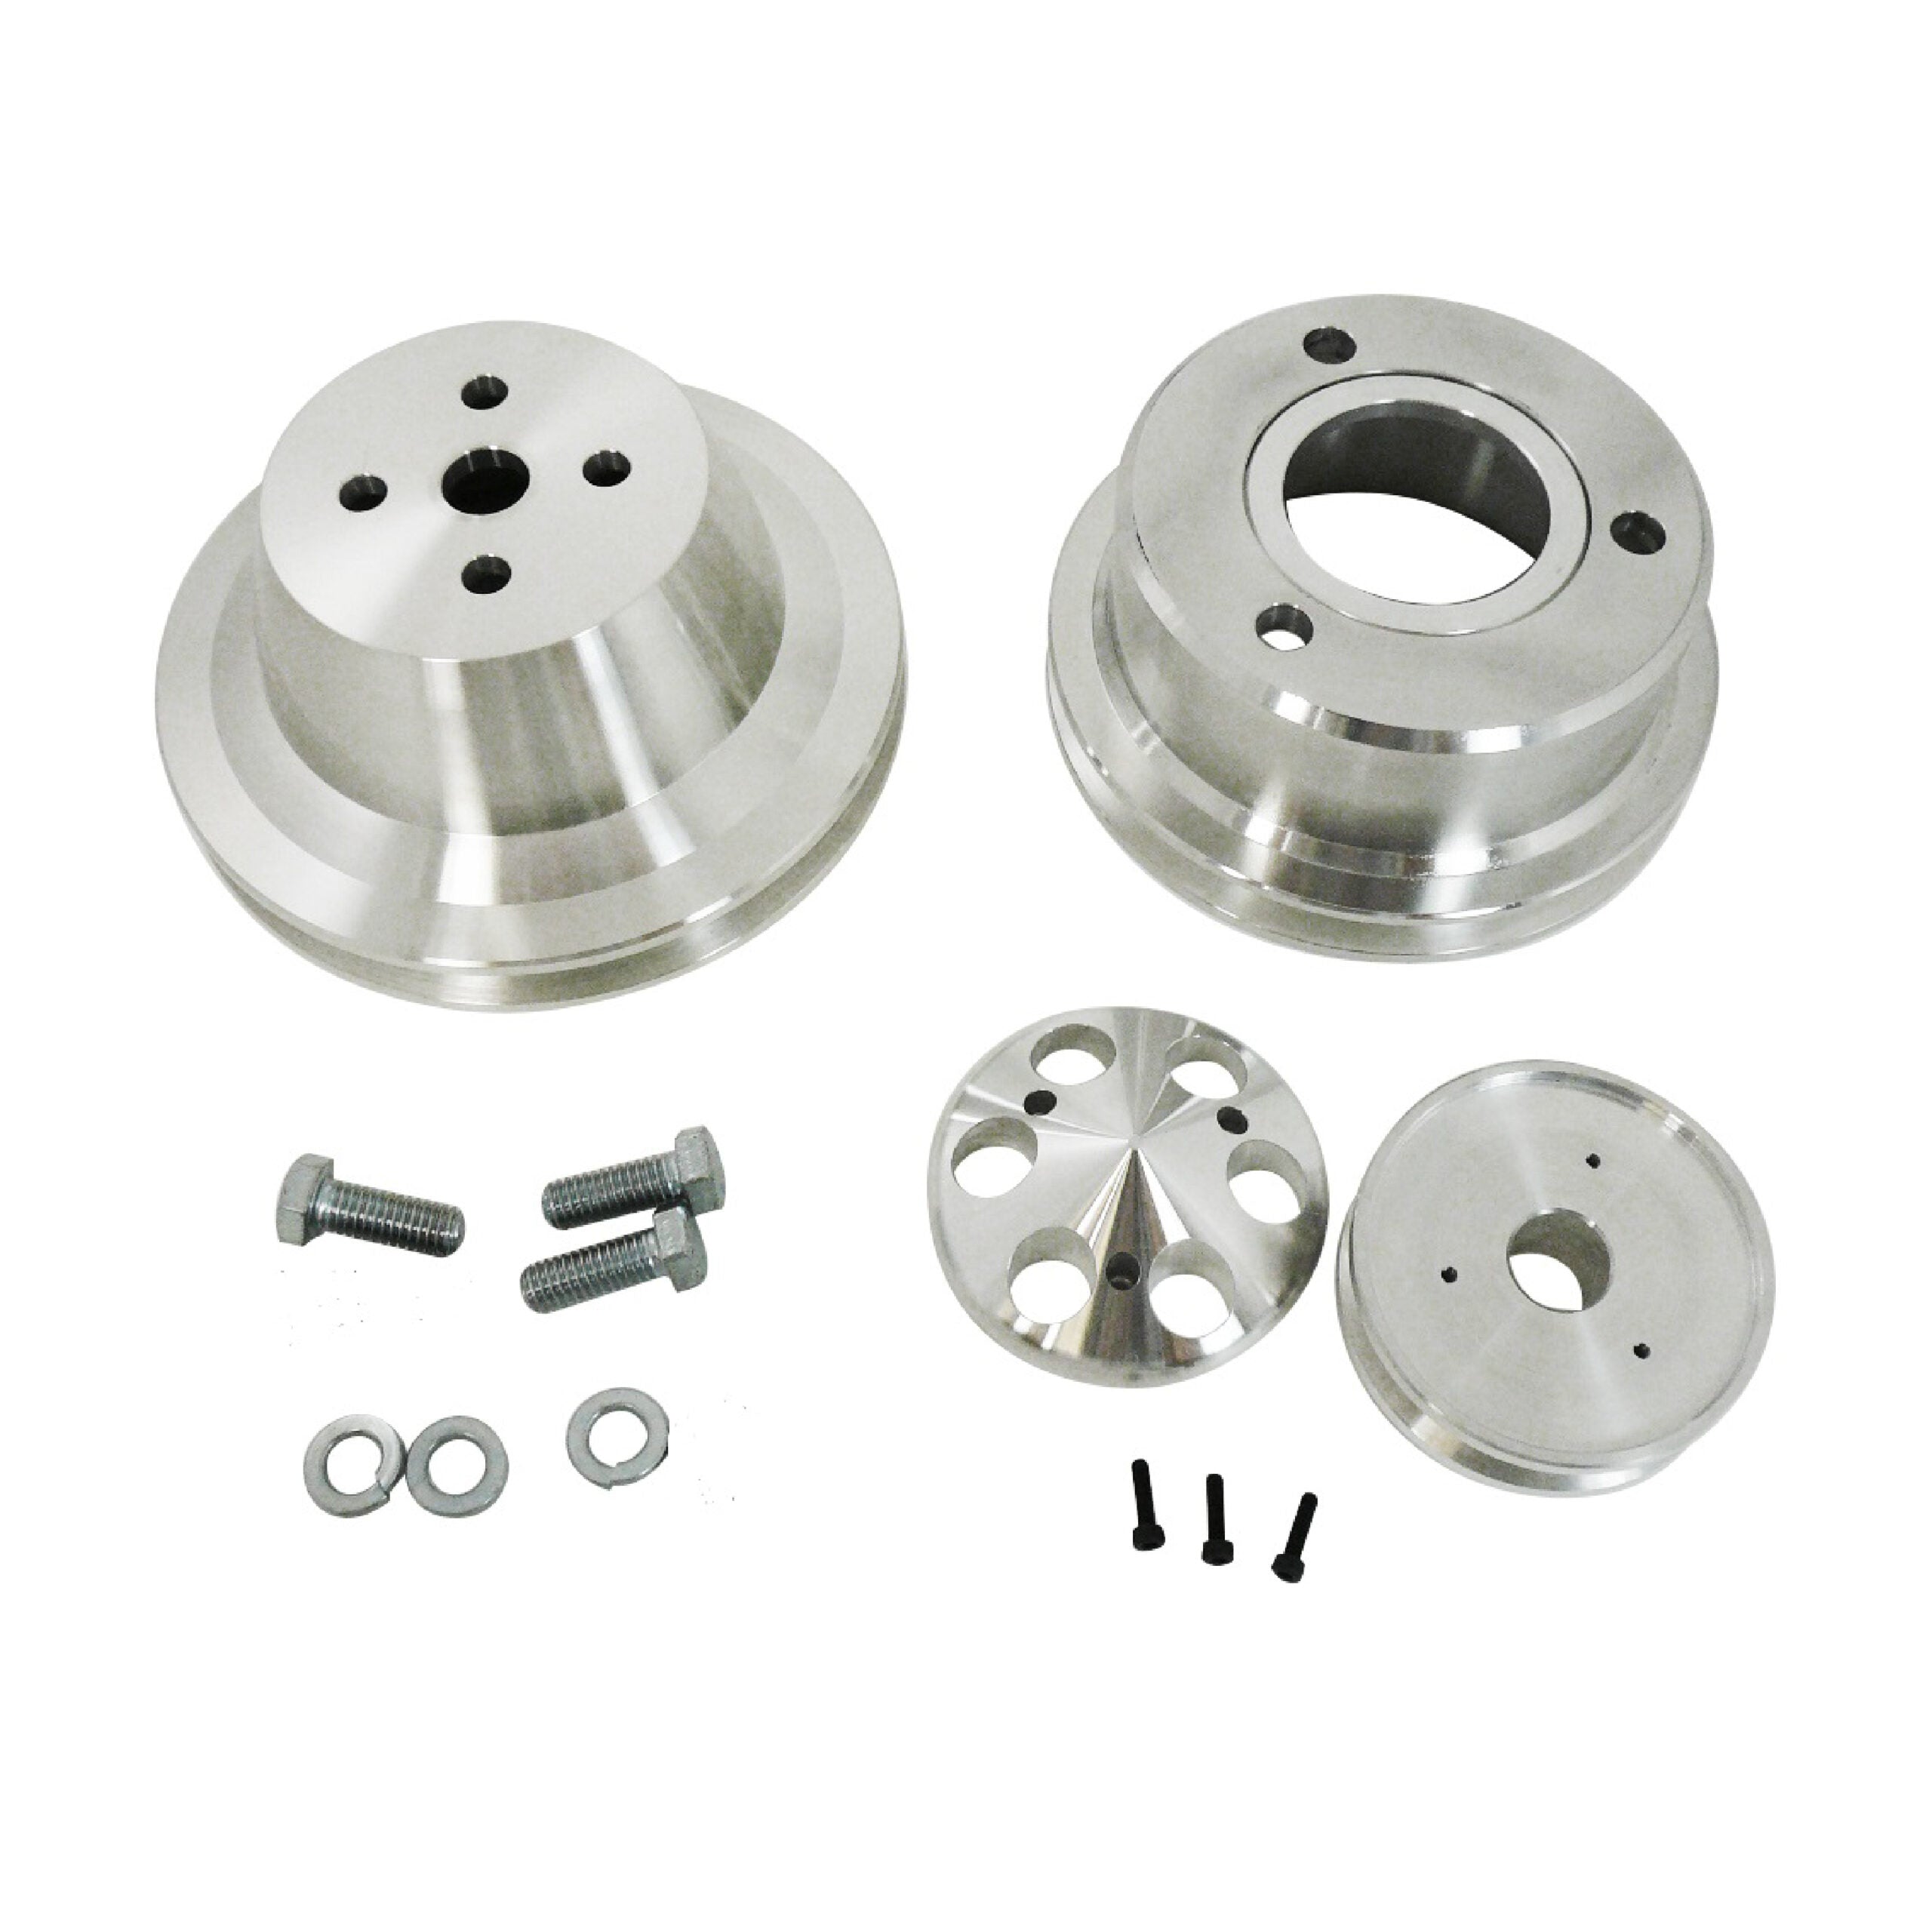 Racing Power Company R8720 Aluminum Water Pump Pulley 3 Pc Kit 1V-Belt (A